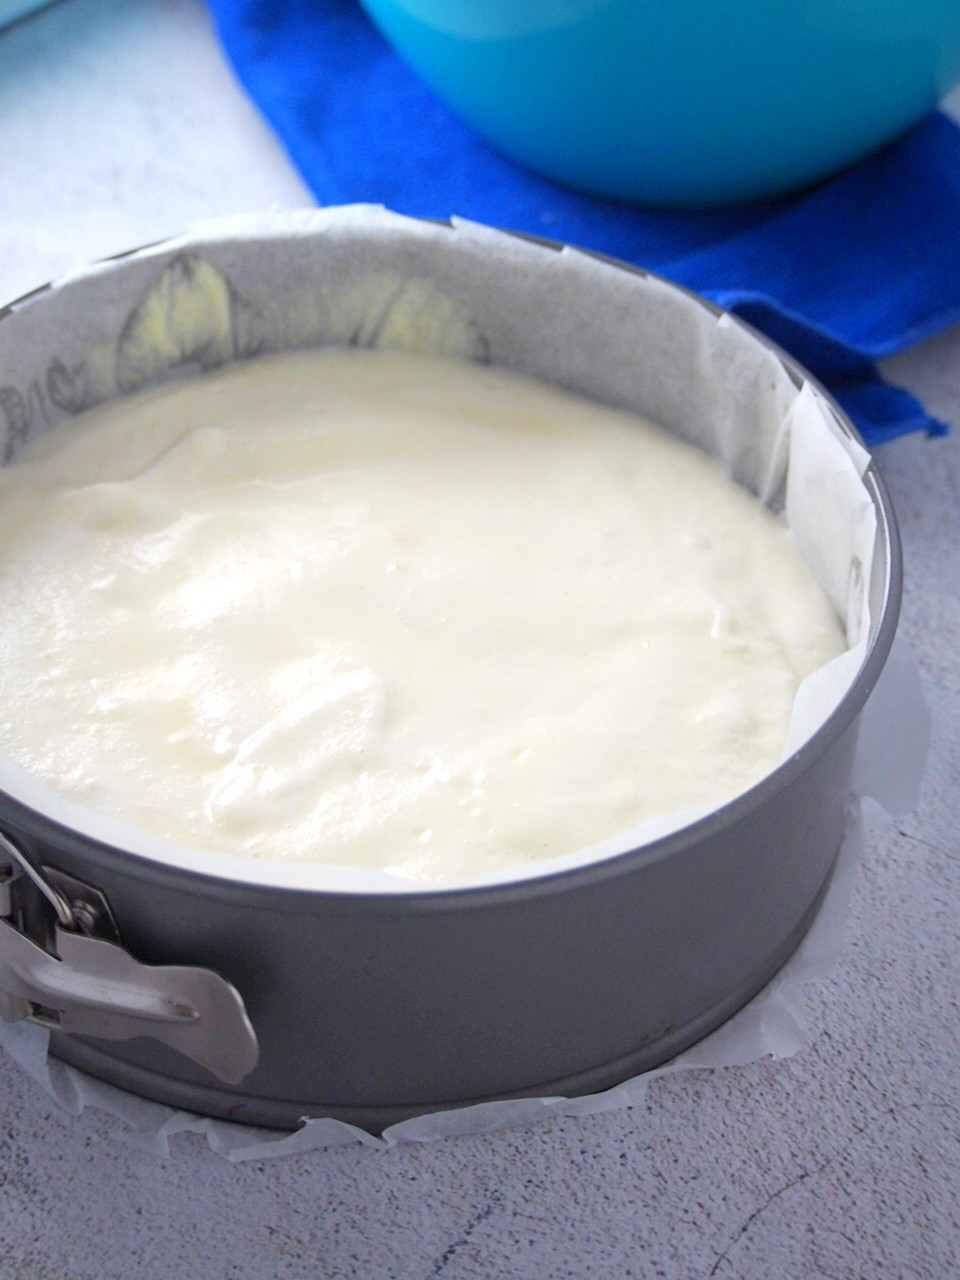 The cheesecake batter poured into the prepared baking pan.